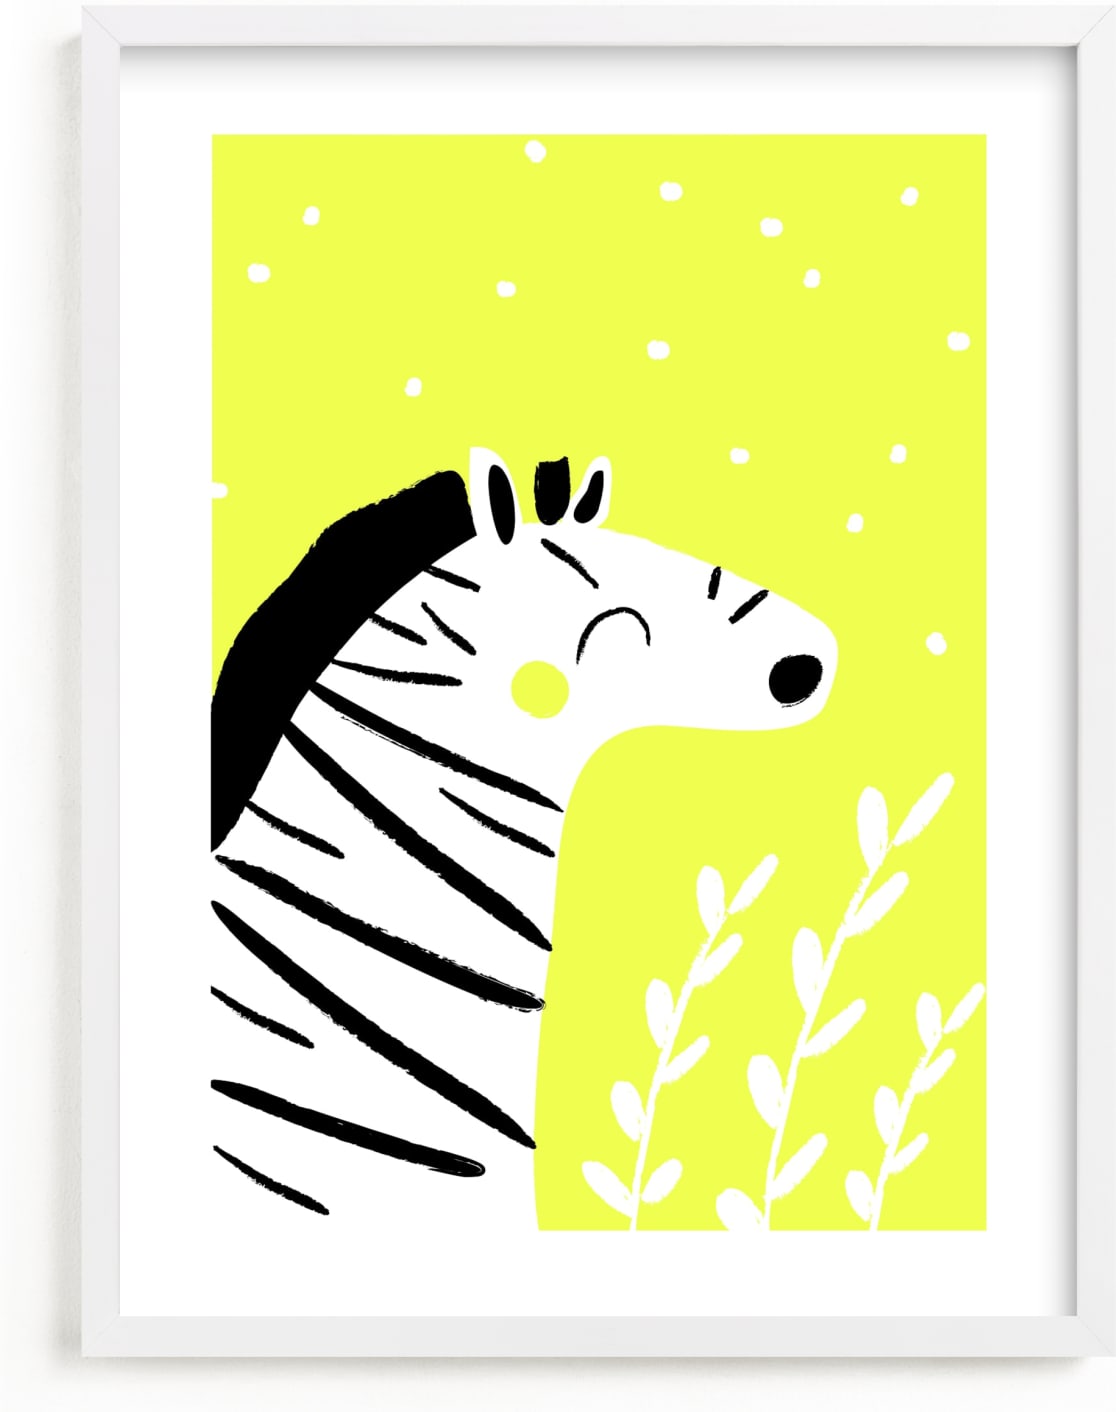 This is a black and white kids wall art by Angela Thompson called Happy Zebra.